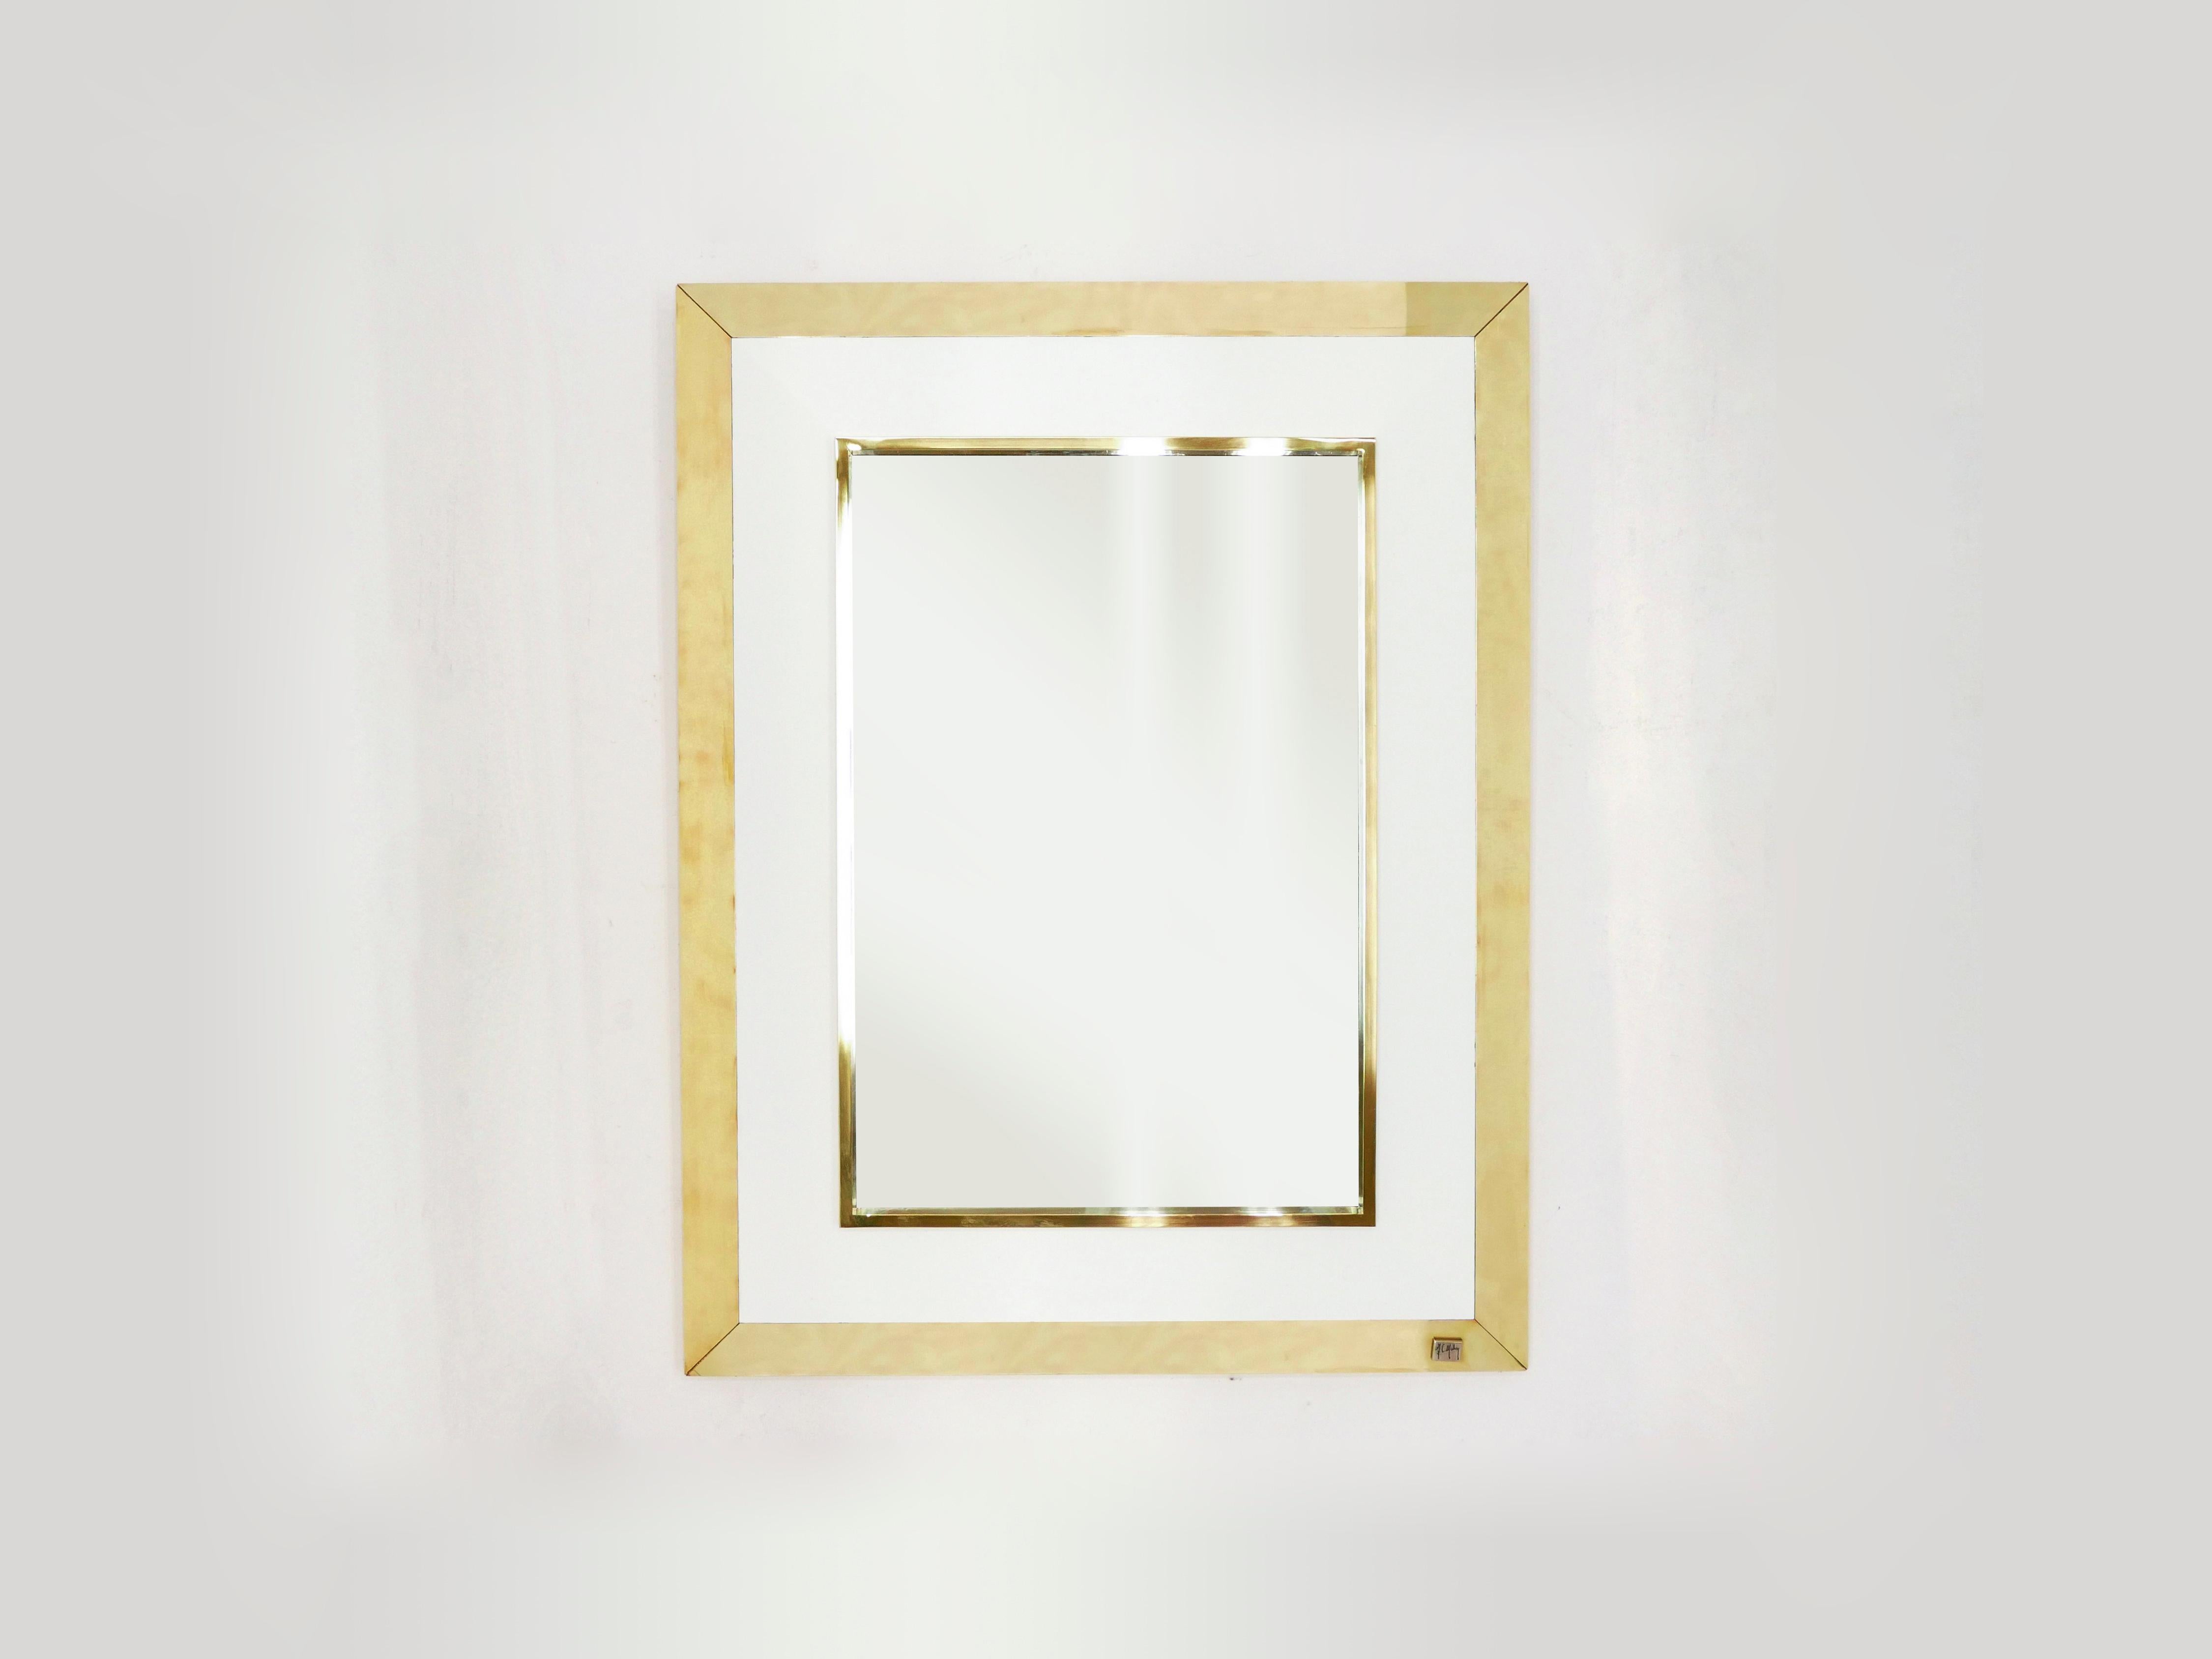 The white lacquer and brass make up the decorative frame of this beautiful wall mirror. A vintage style look contrasting with a contemporary finish. It was designed by Jean-Claude Mahey and edited by Romeo Paris in the 1970s. Fully cleaned, and in